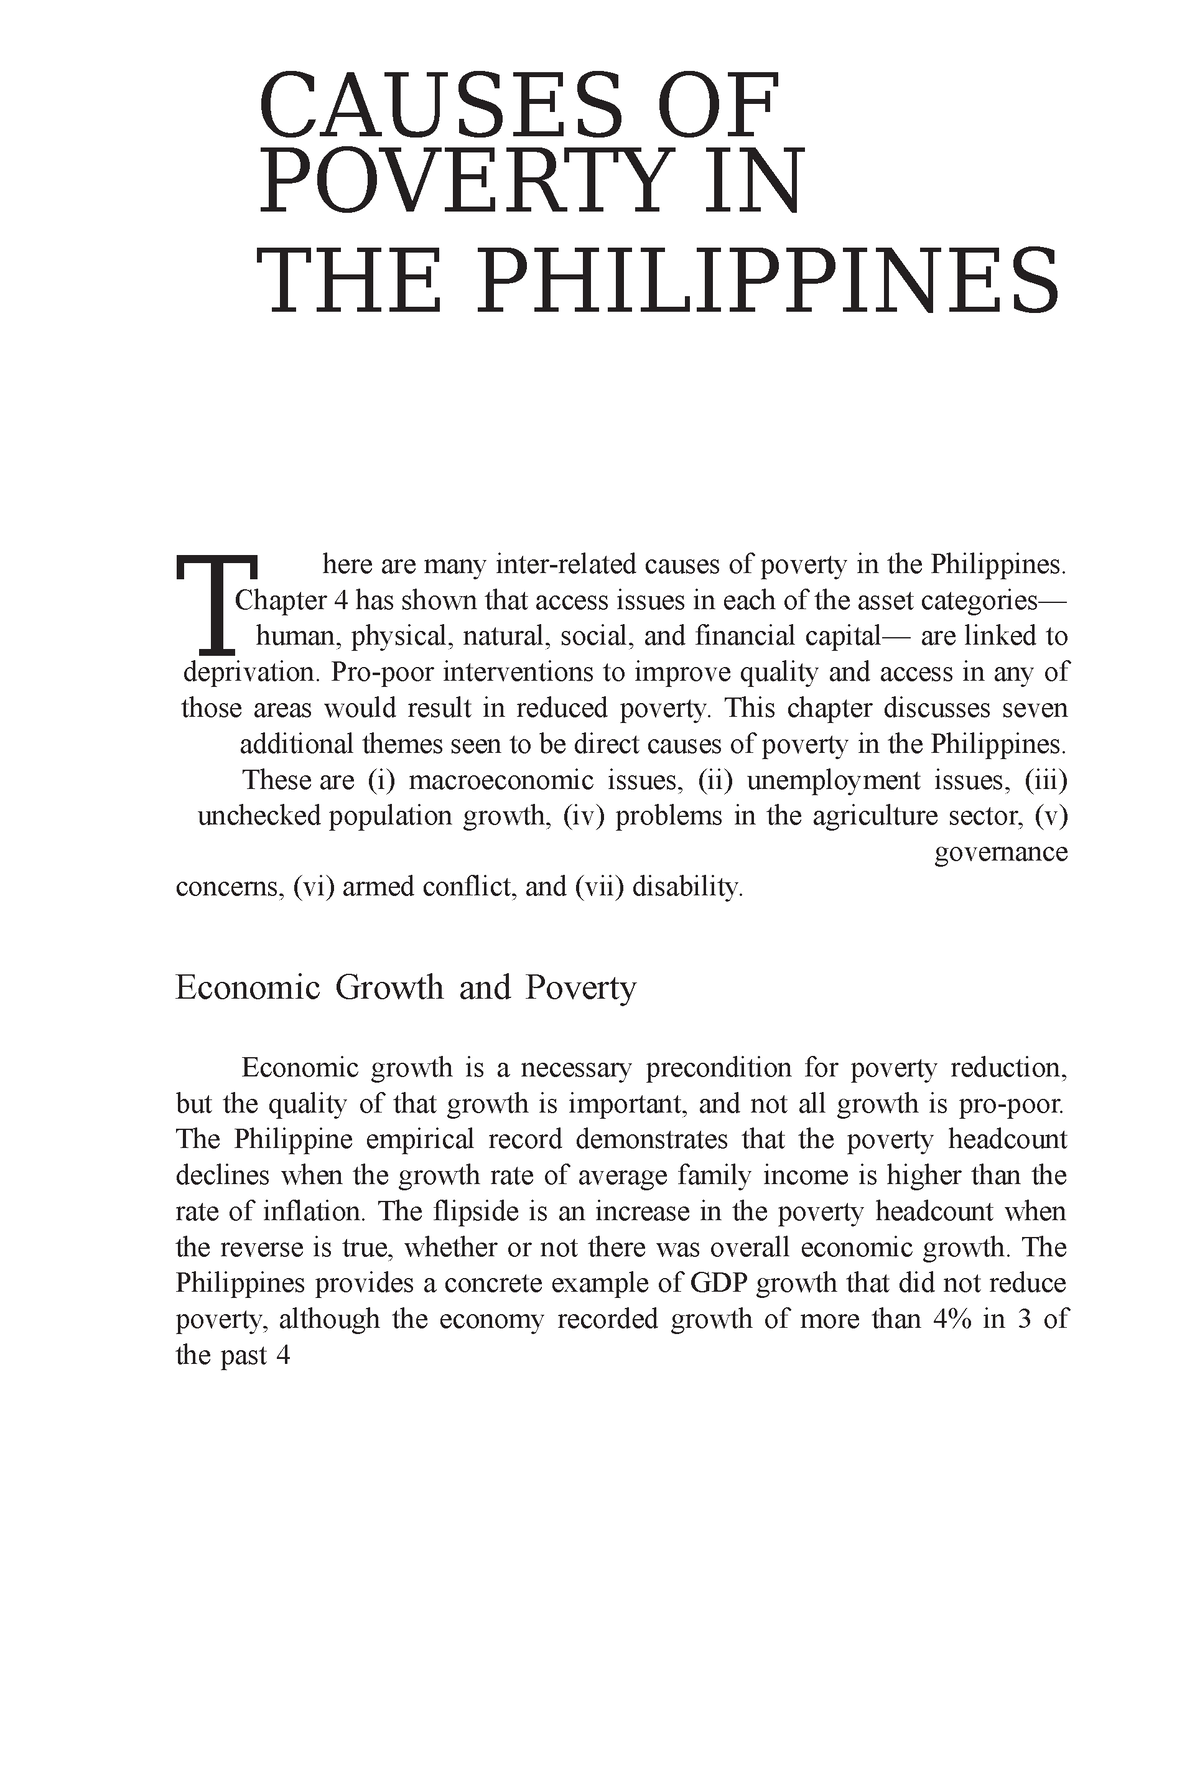 poverty in the philippines essay 2023